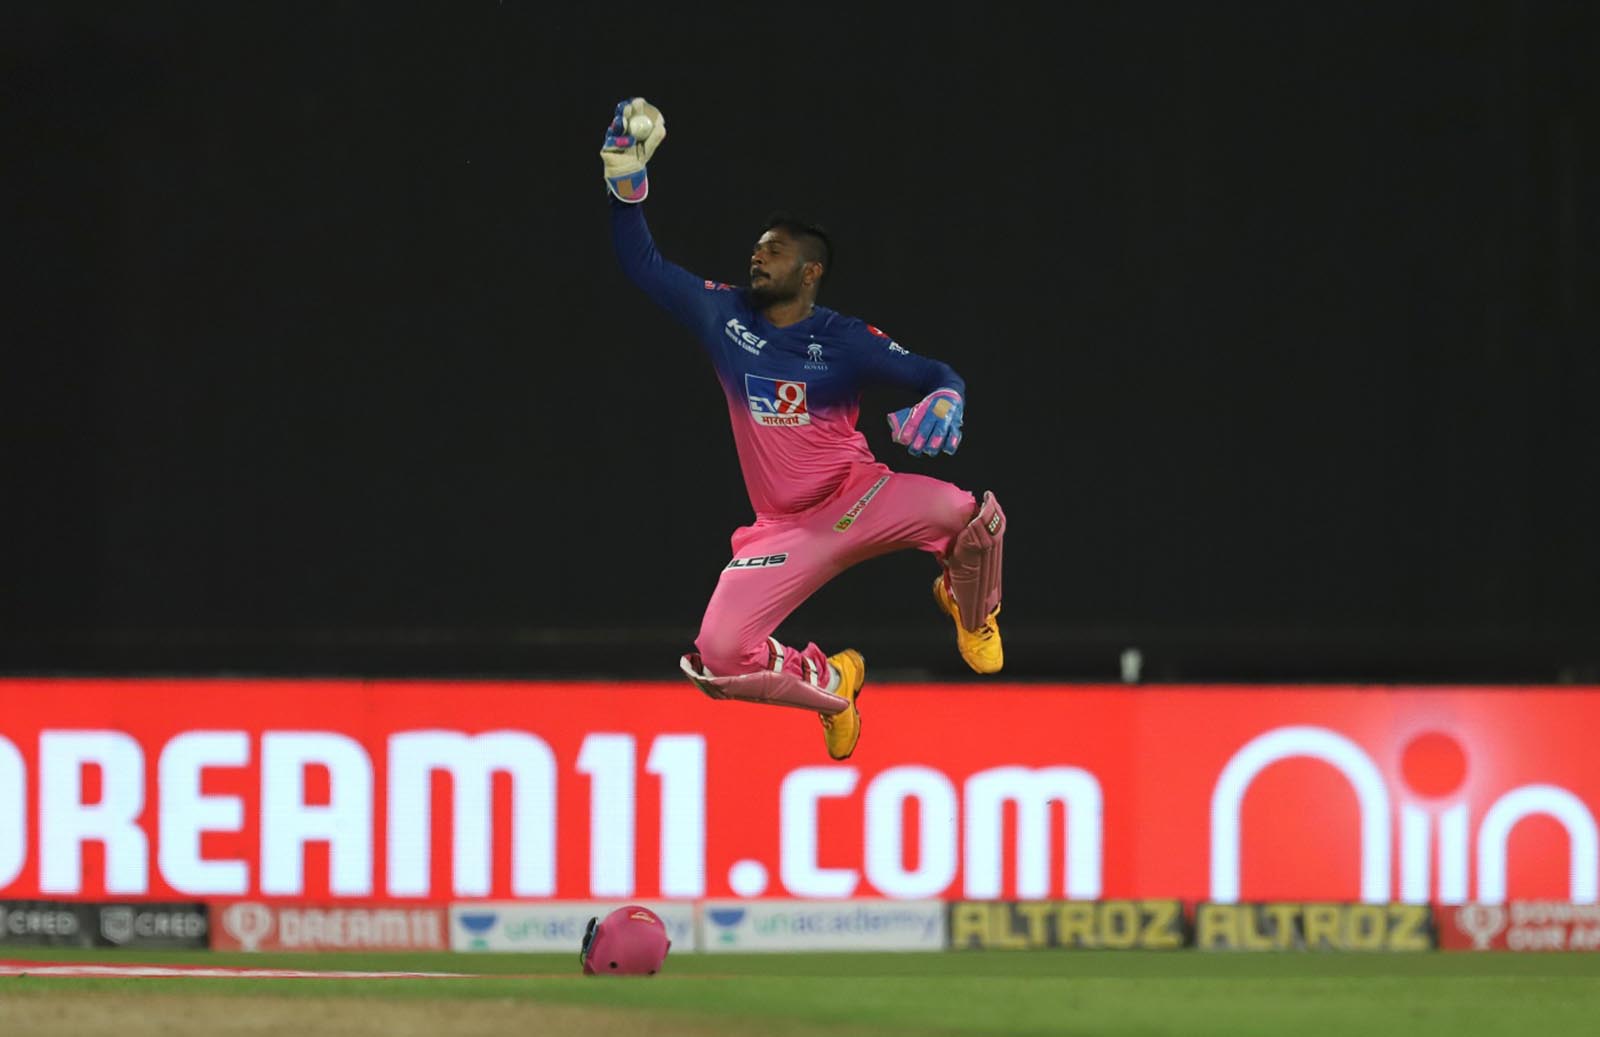 Every country hopes their wicketkeeper can turn out to be MS Dhoni: Sanju Samson